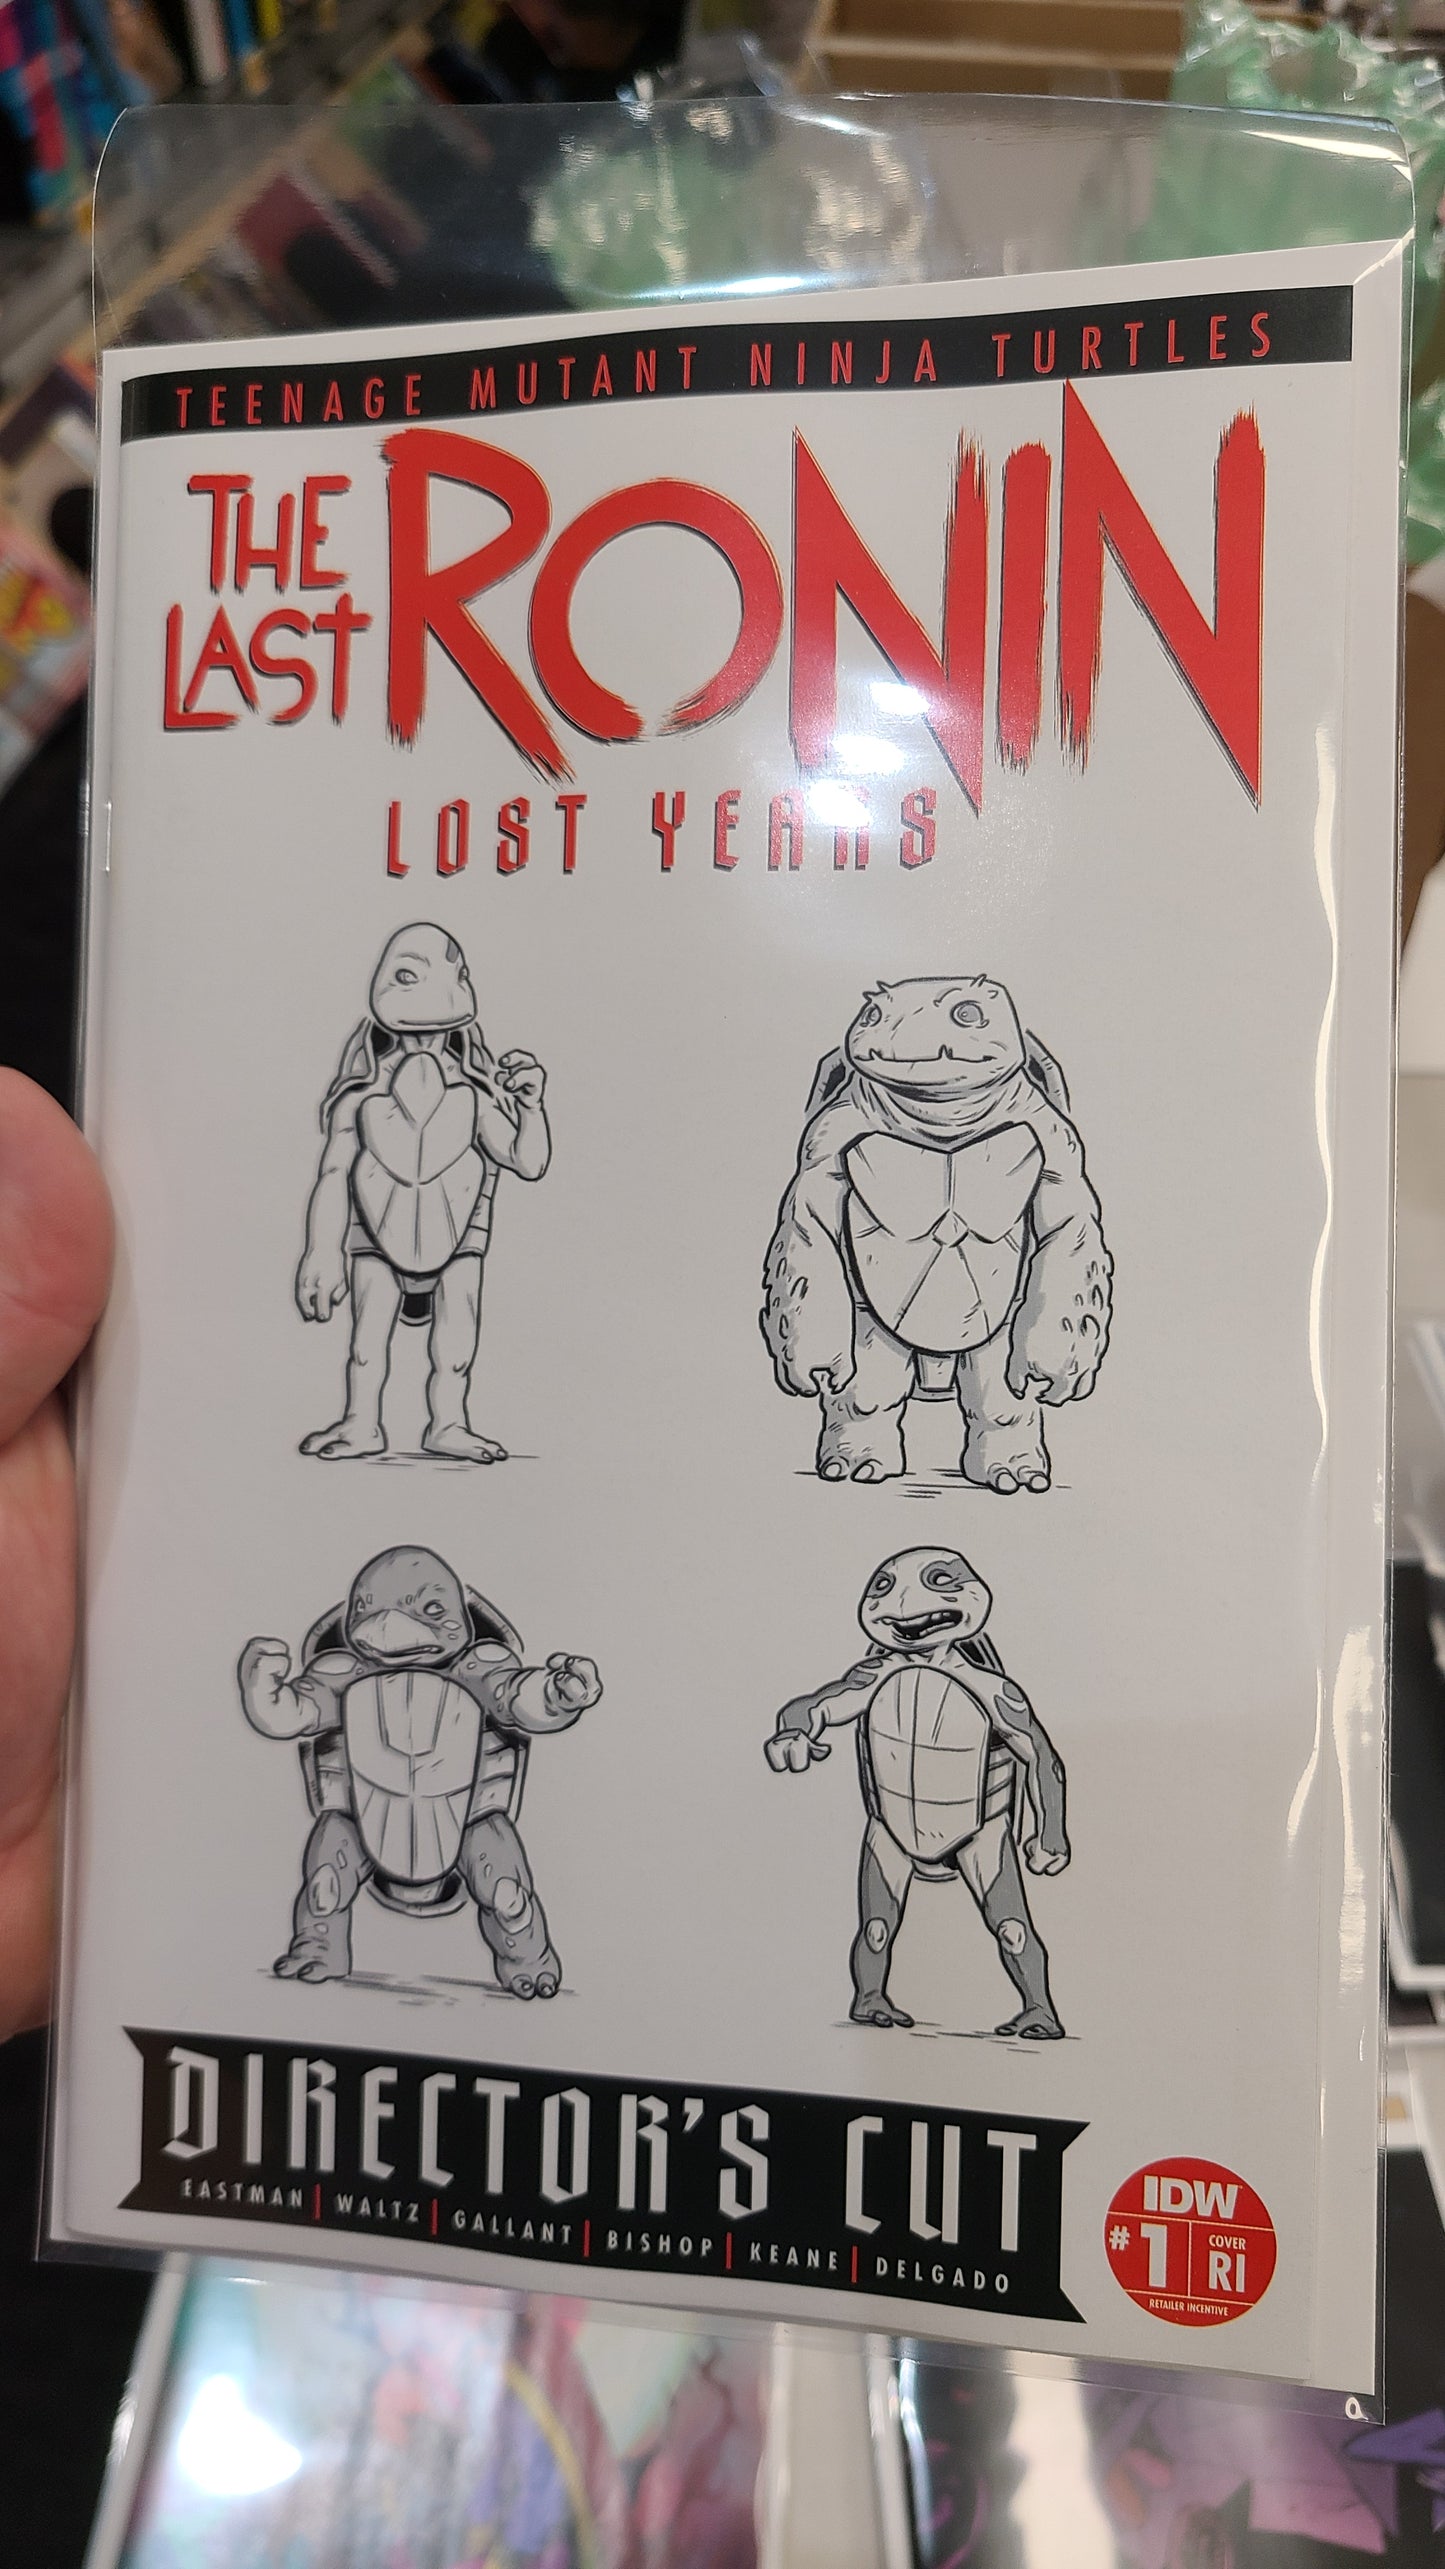 TMNT THE LAST RONIN: LOST YEARS #1 DIRECTOR'S CUT 1:10 BY BEN BISHOP